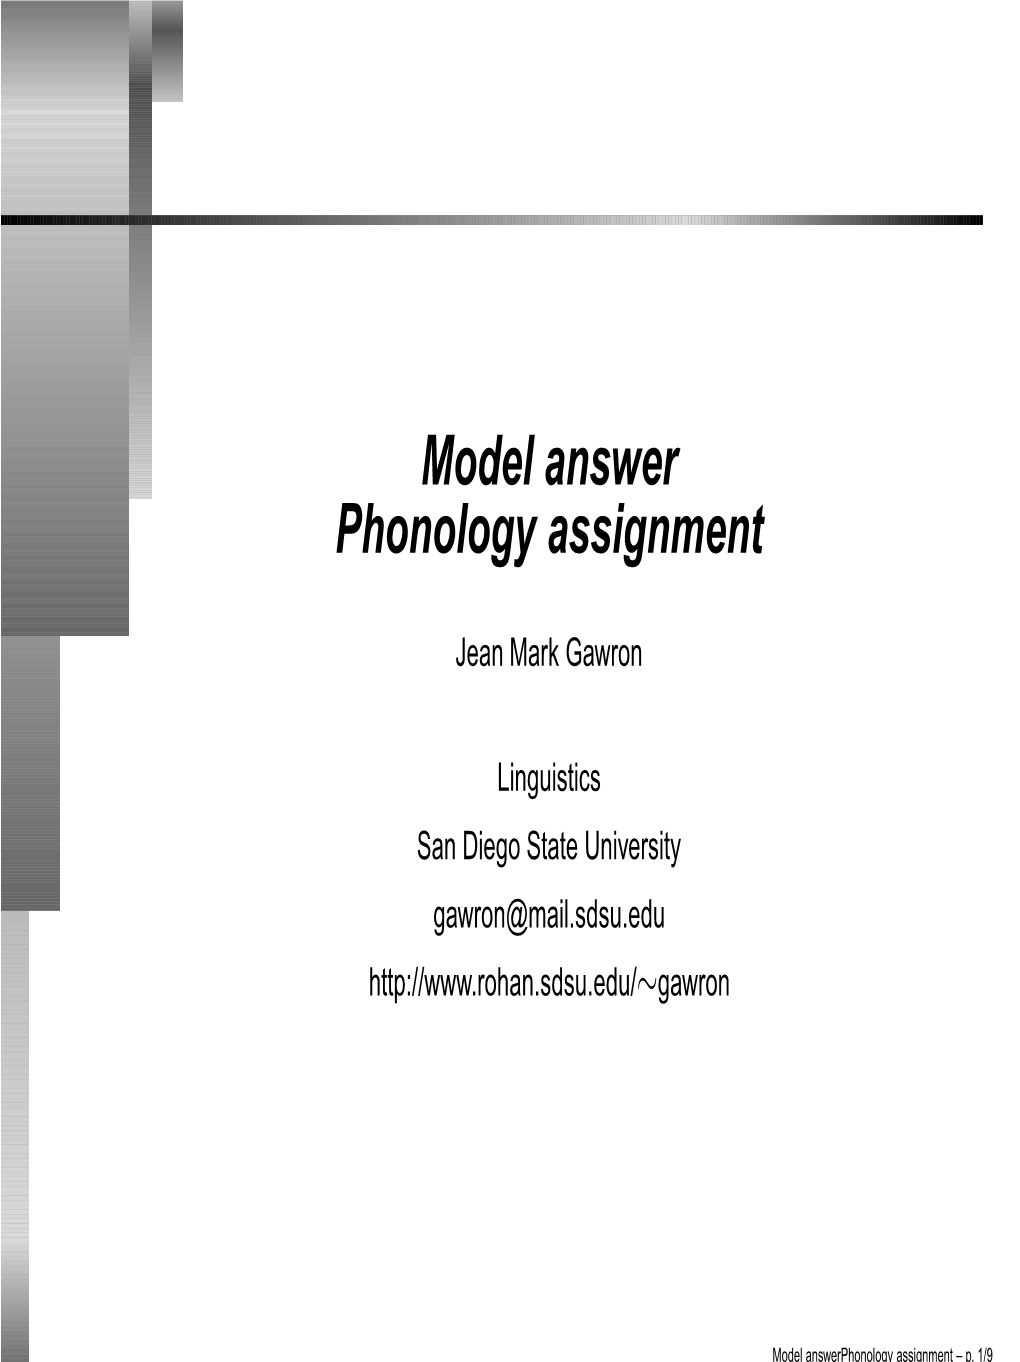 Model Answer Phonology Assignment